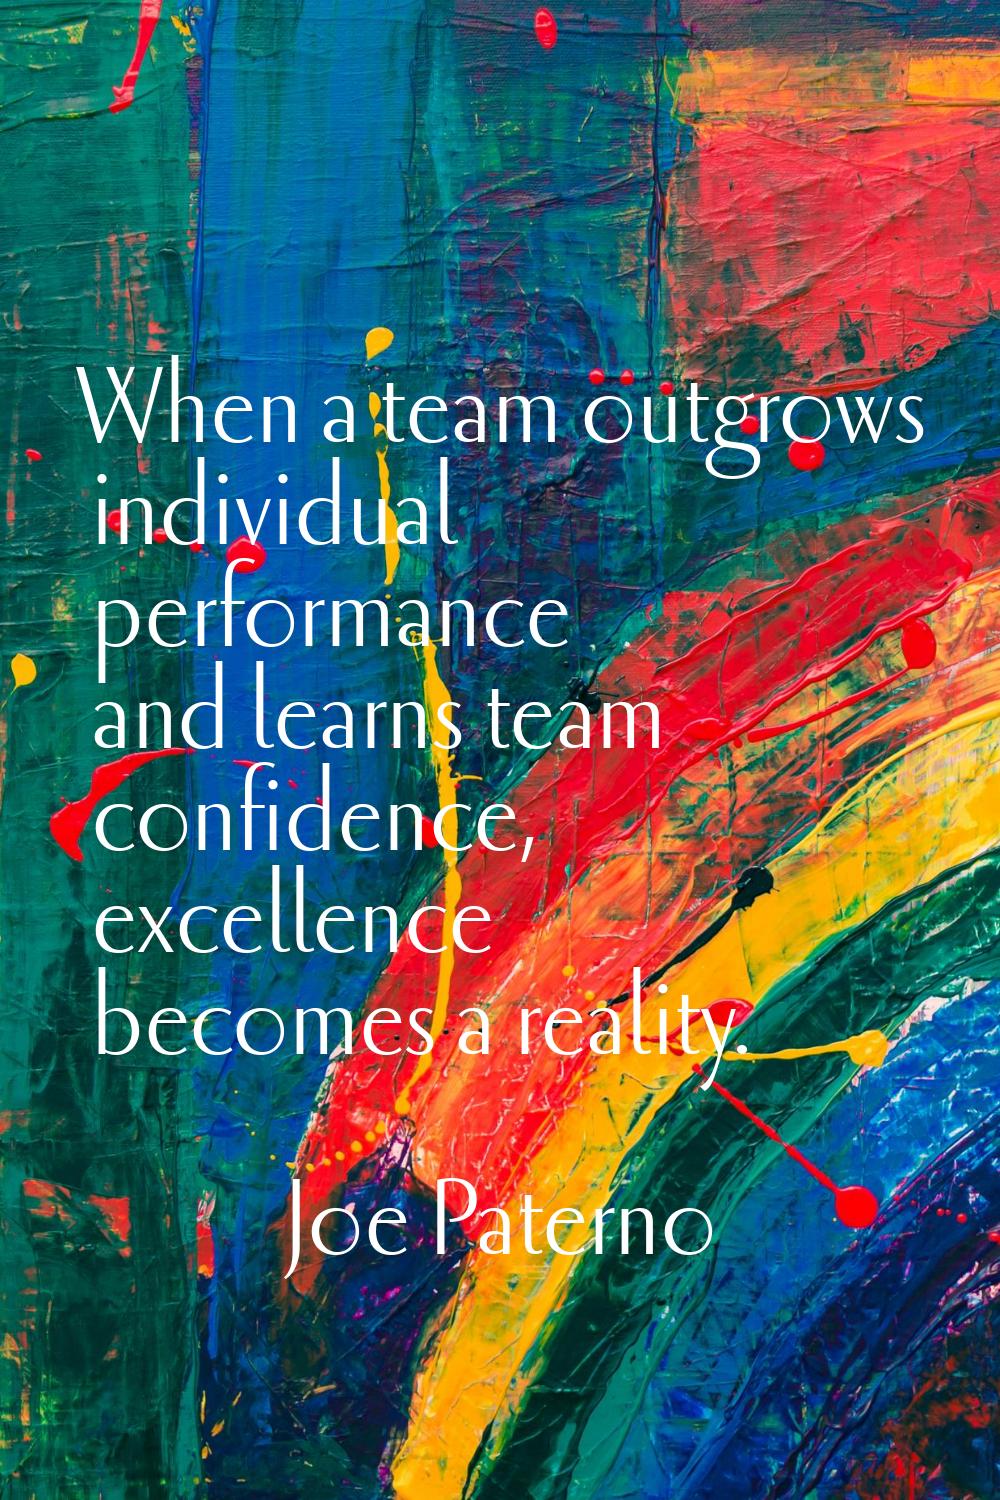 When a team outgrows individual performance and learns team confidence, excellence becomes a realit